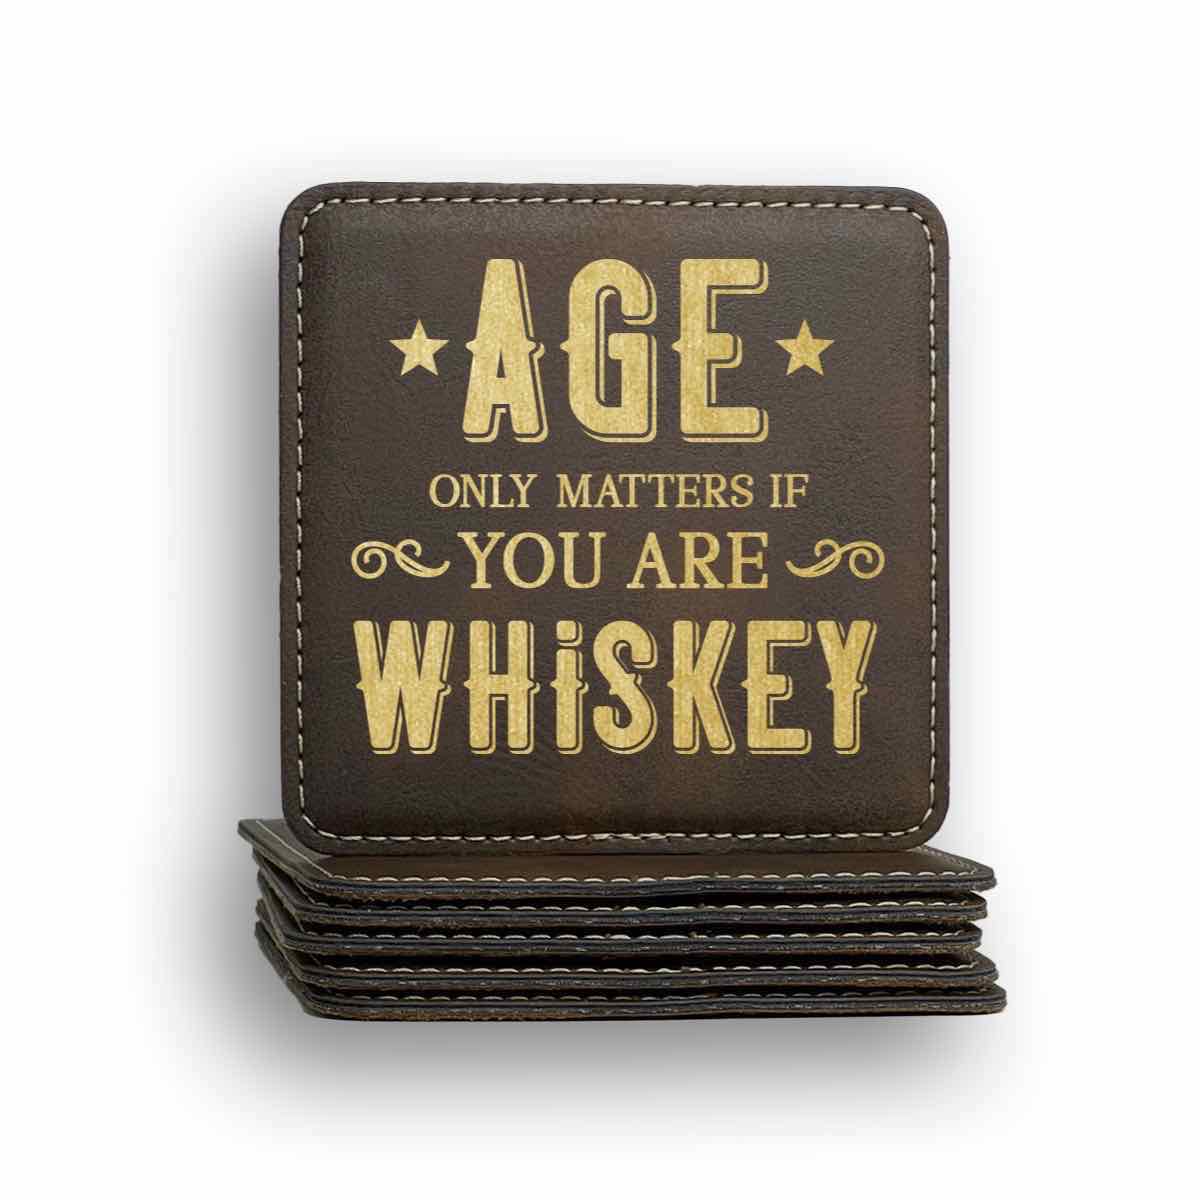 Age Matters Only If You're Whiskey Coaster